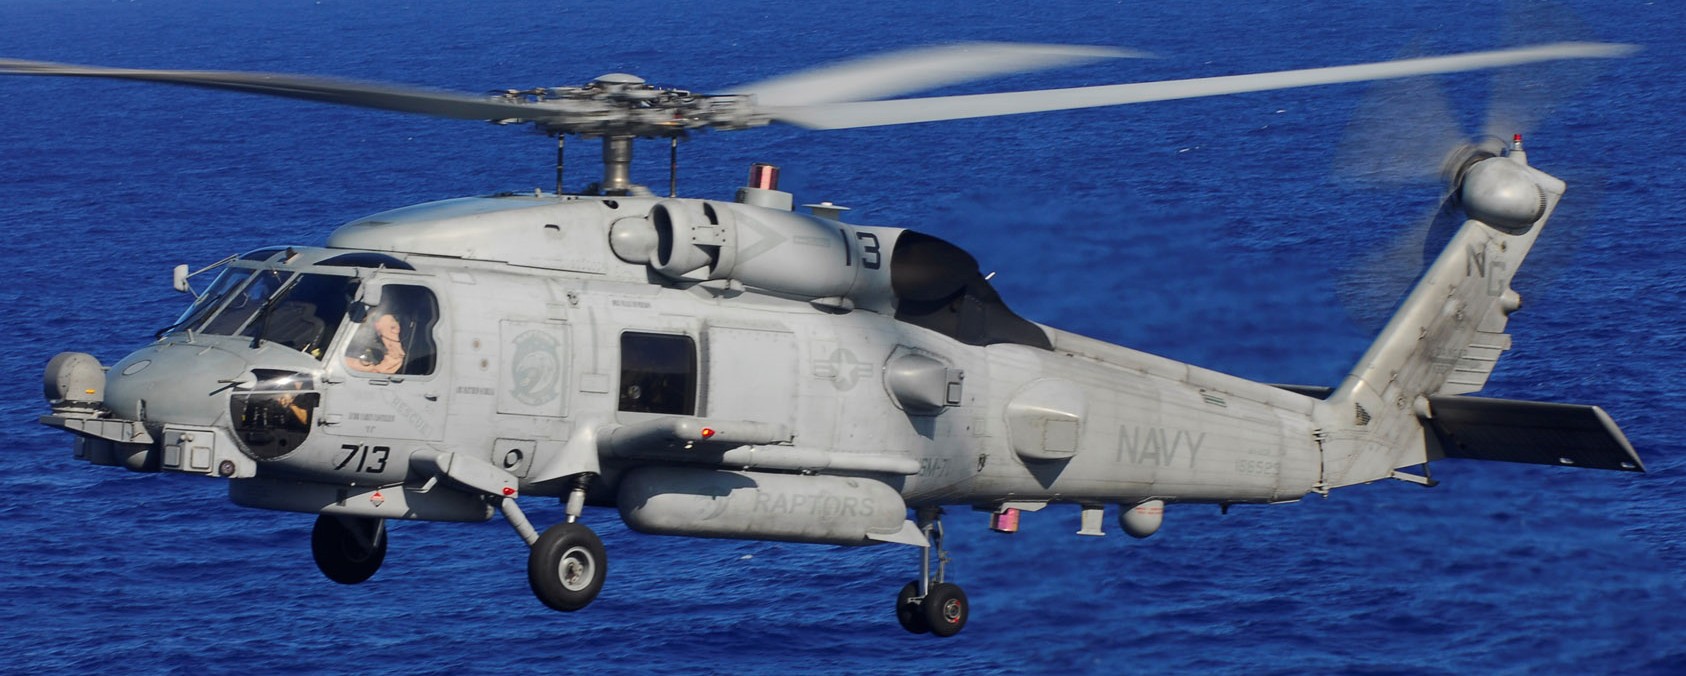 hsm-71 raptors helicopter maritime strike squadron mh-60r seahawk navy 2009 35